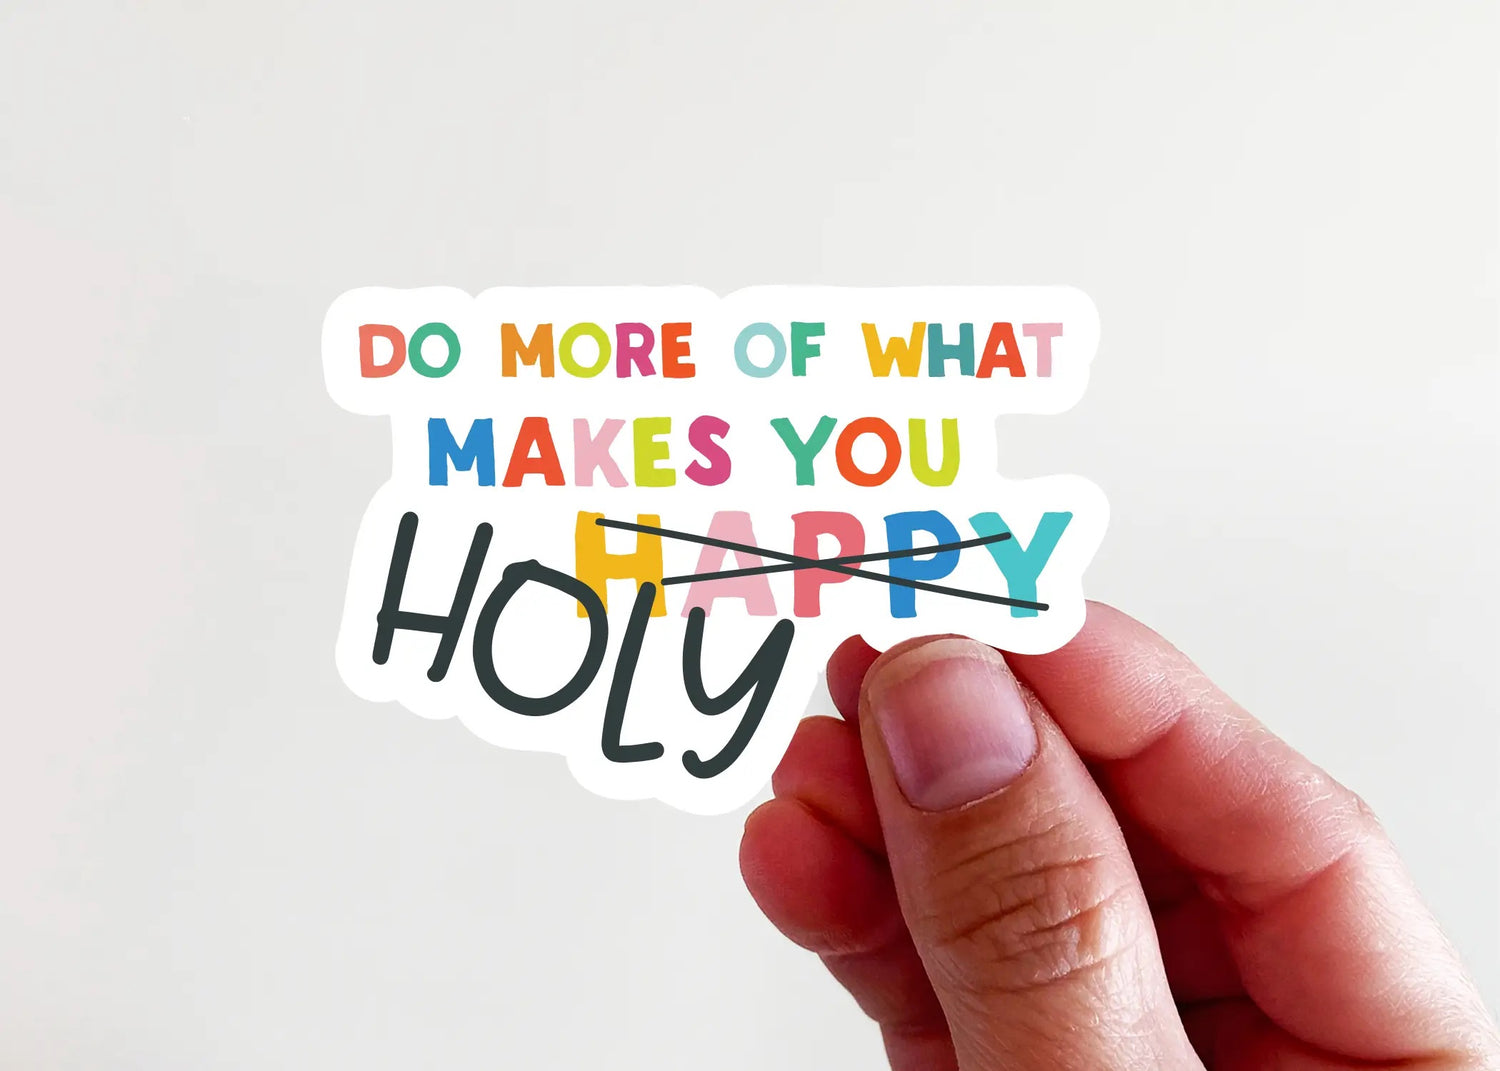 Do More of What Makes You Holy